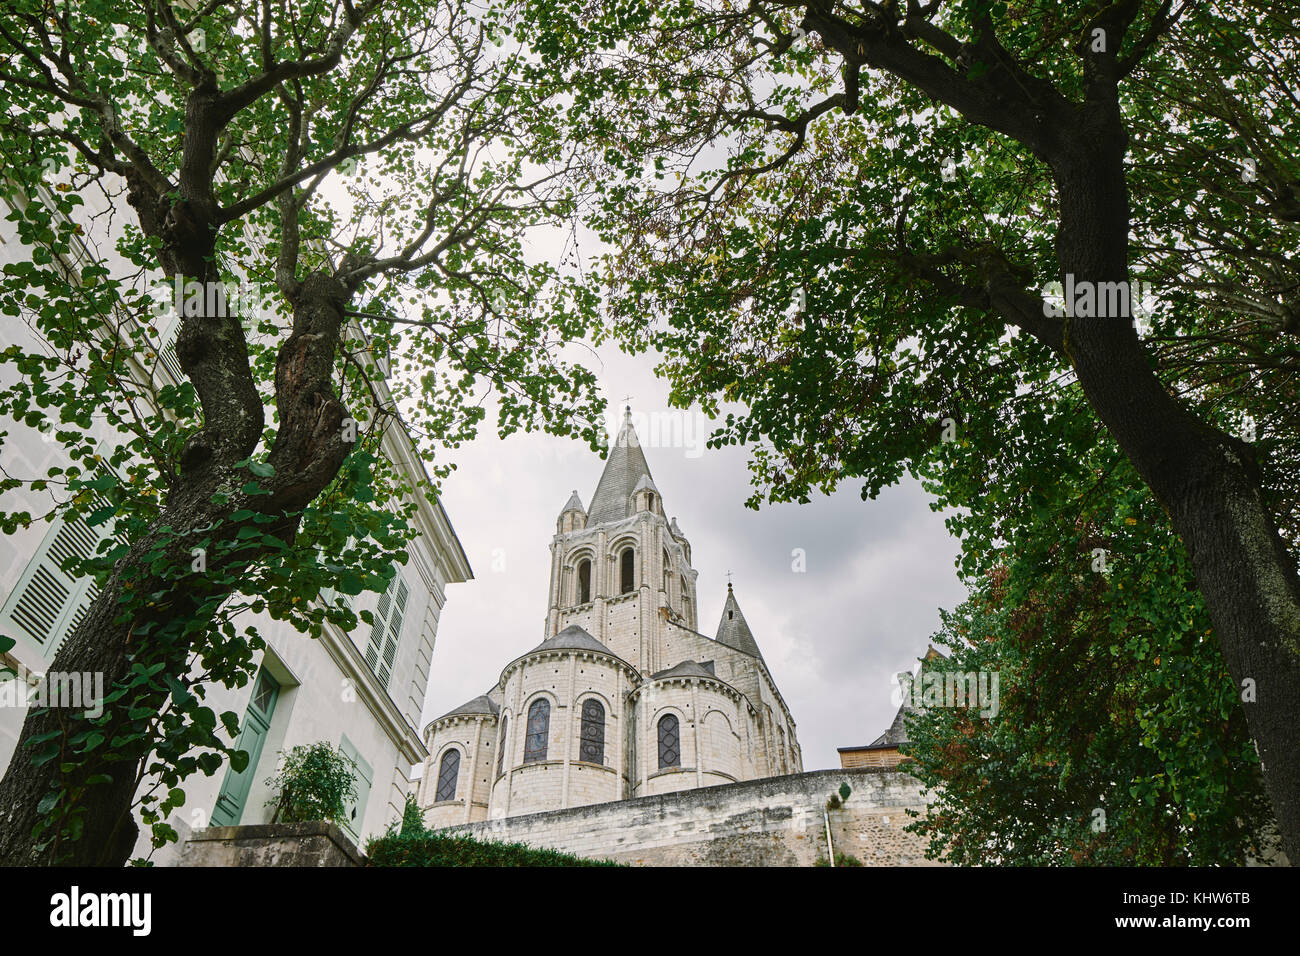 Low angle view of Collegiale Saint Ours, Loches, Loire Valley, France Stock Photo